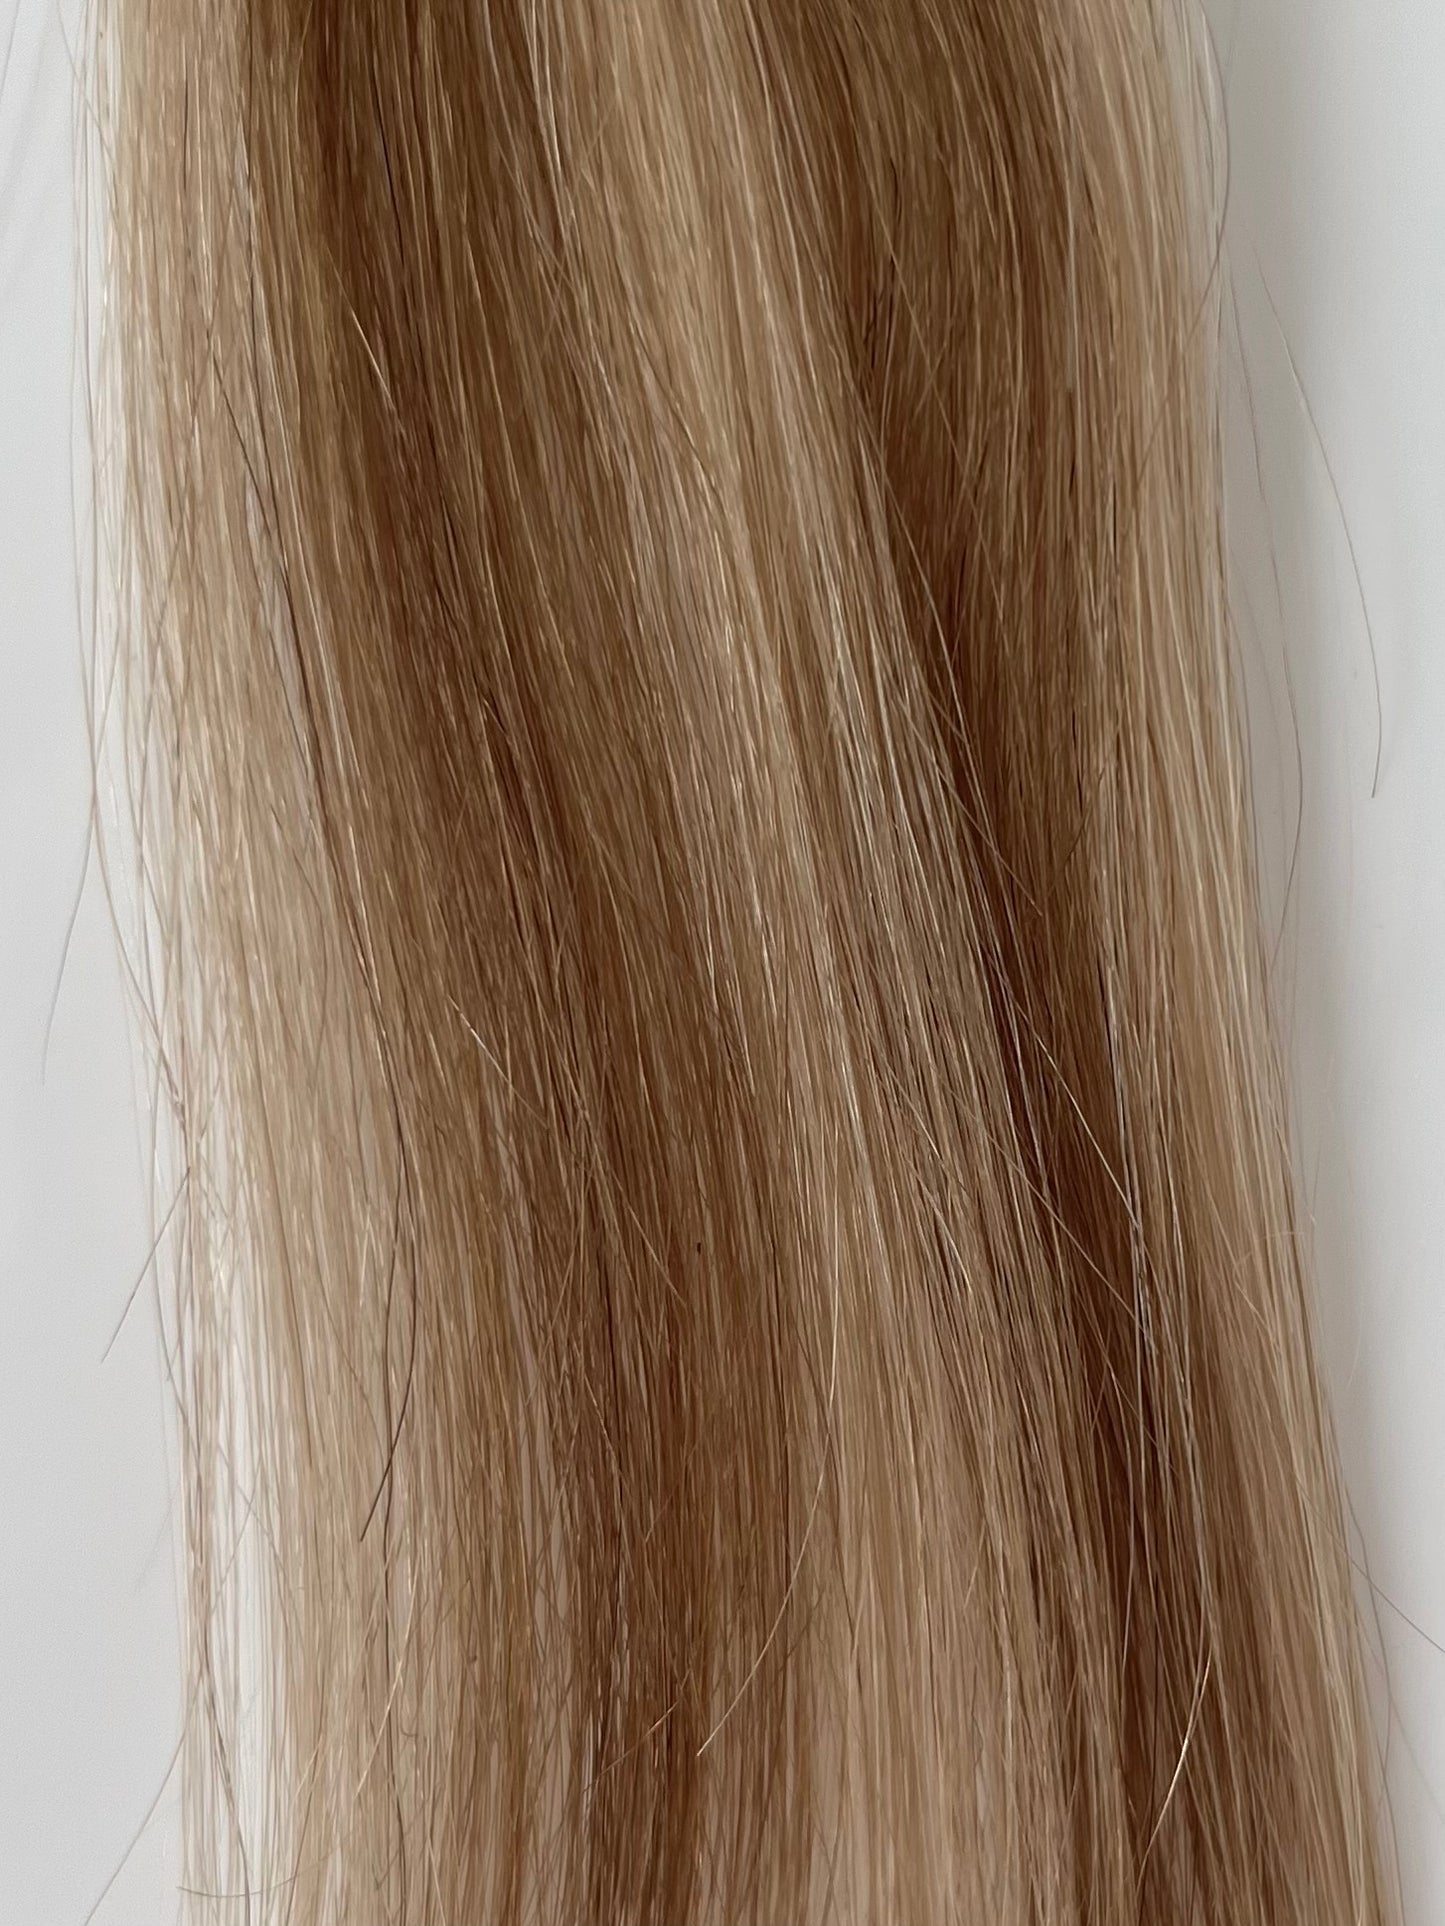 RETAIL HALO EXTENSIONS - HIGHLIGHTED - ROYAL BRONDE